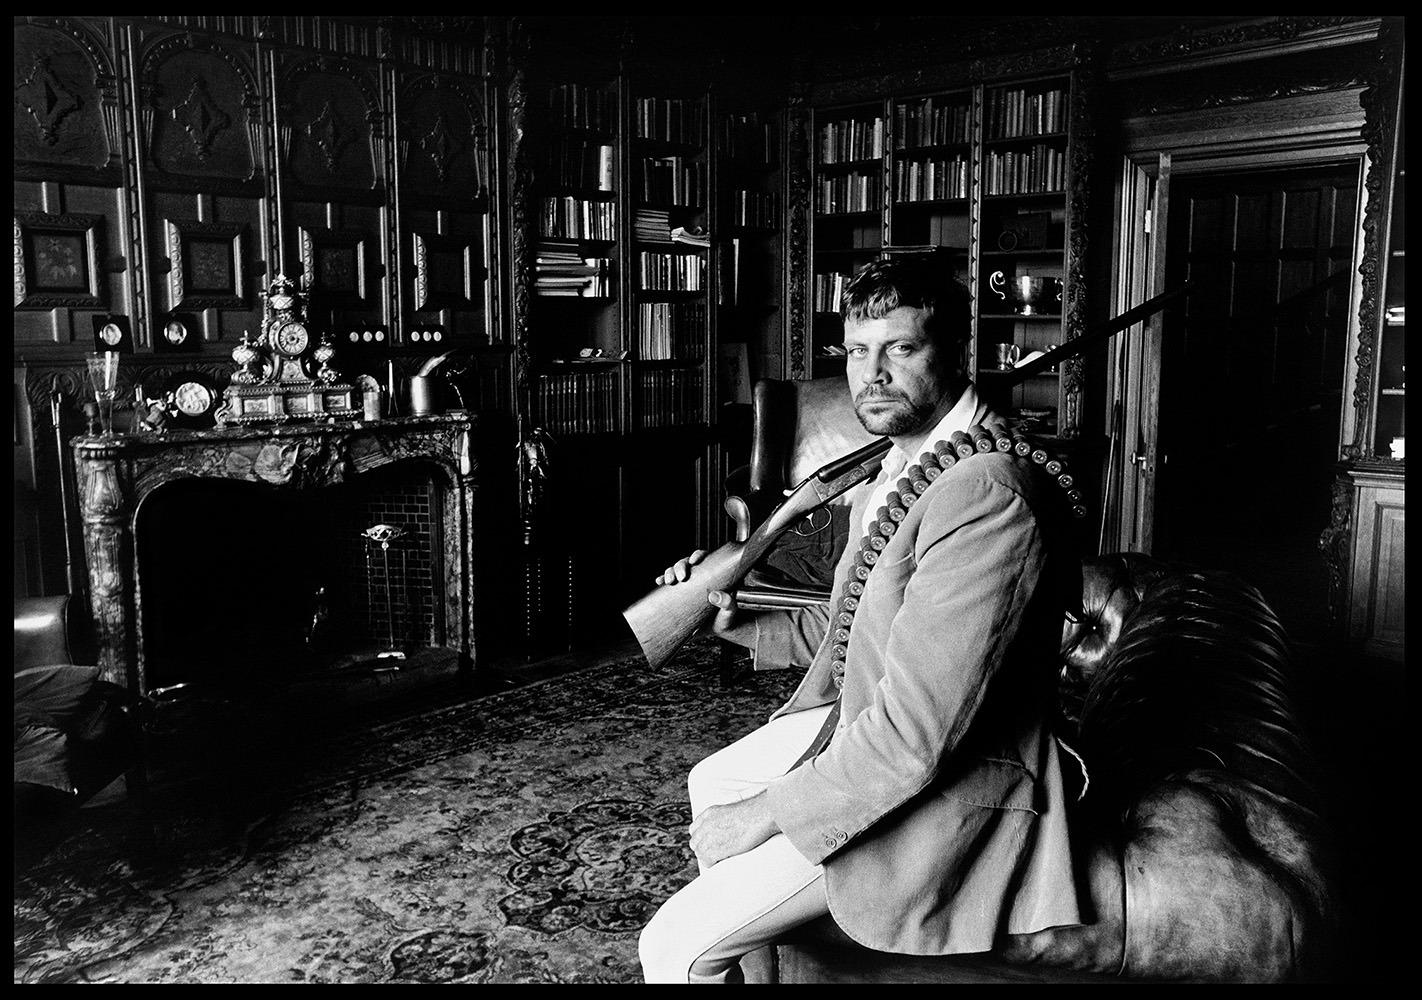 Black and White Photograph David Steen - Oliver Reed - Broome Hall, Angleterre, 1975  Tirage en série limitée 